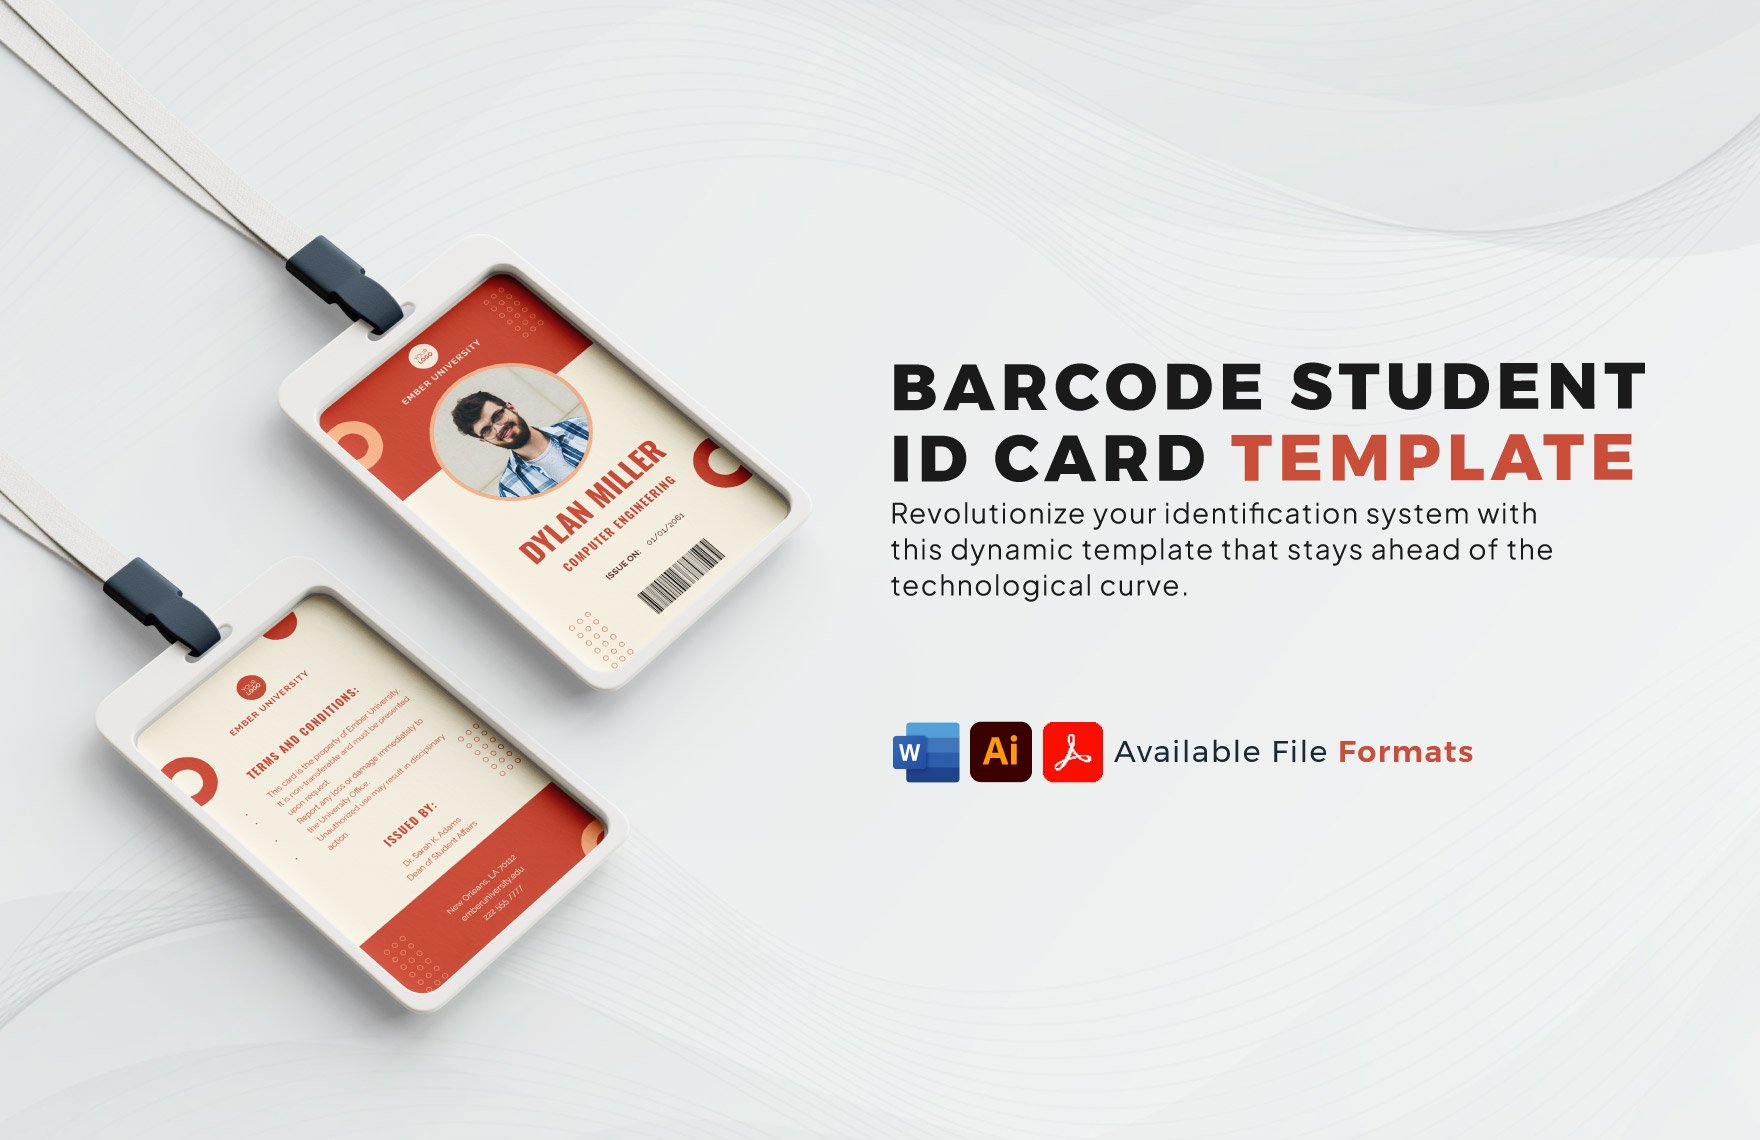 Barcode Student ID Card Template